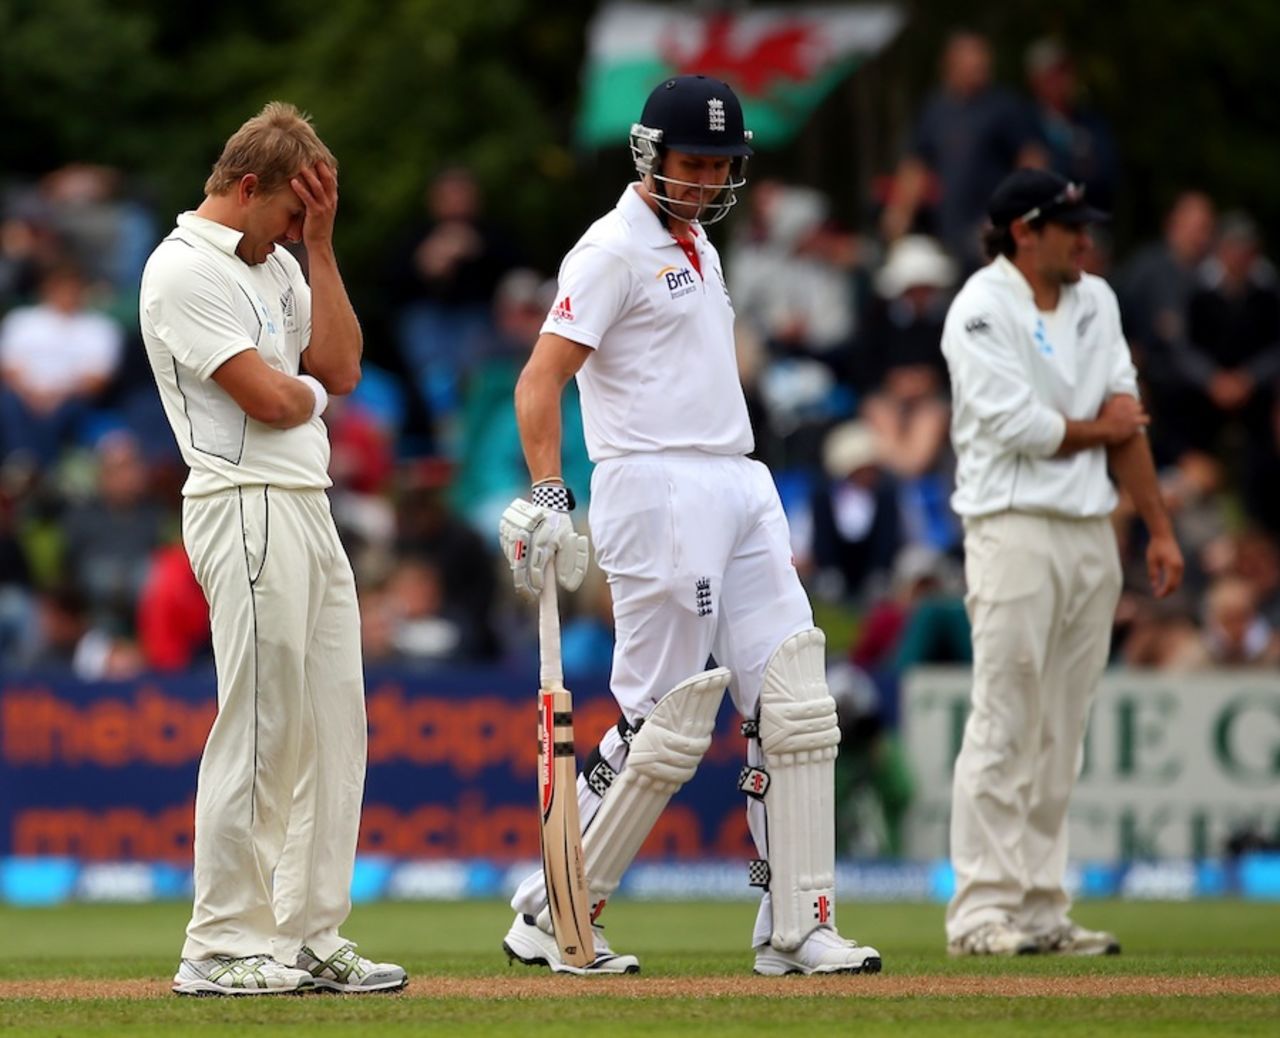 New Zealand's worries increased as England piled on more runs in the third session, New Zealand v England, 1st Test, Dunedin, 4th day, March 9, 2013